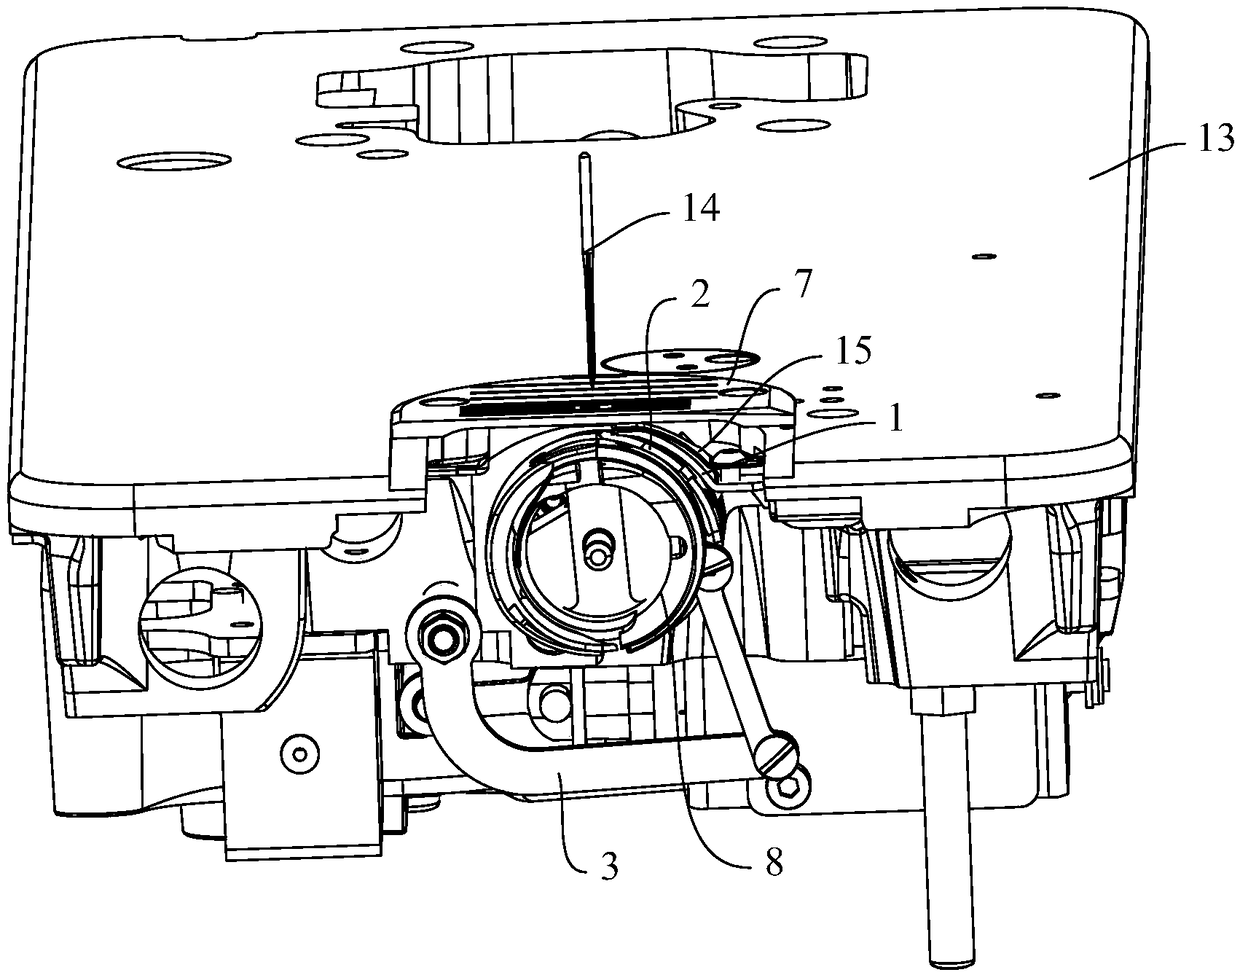 Thread cutting mechanism and sewing machine